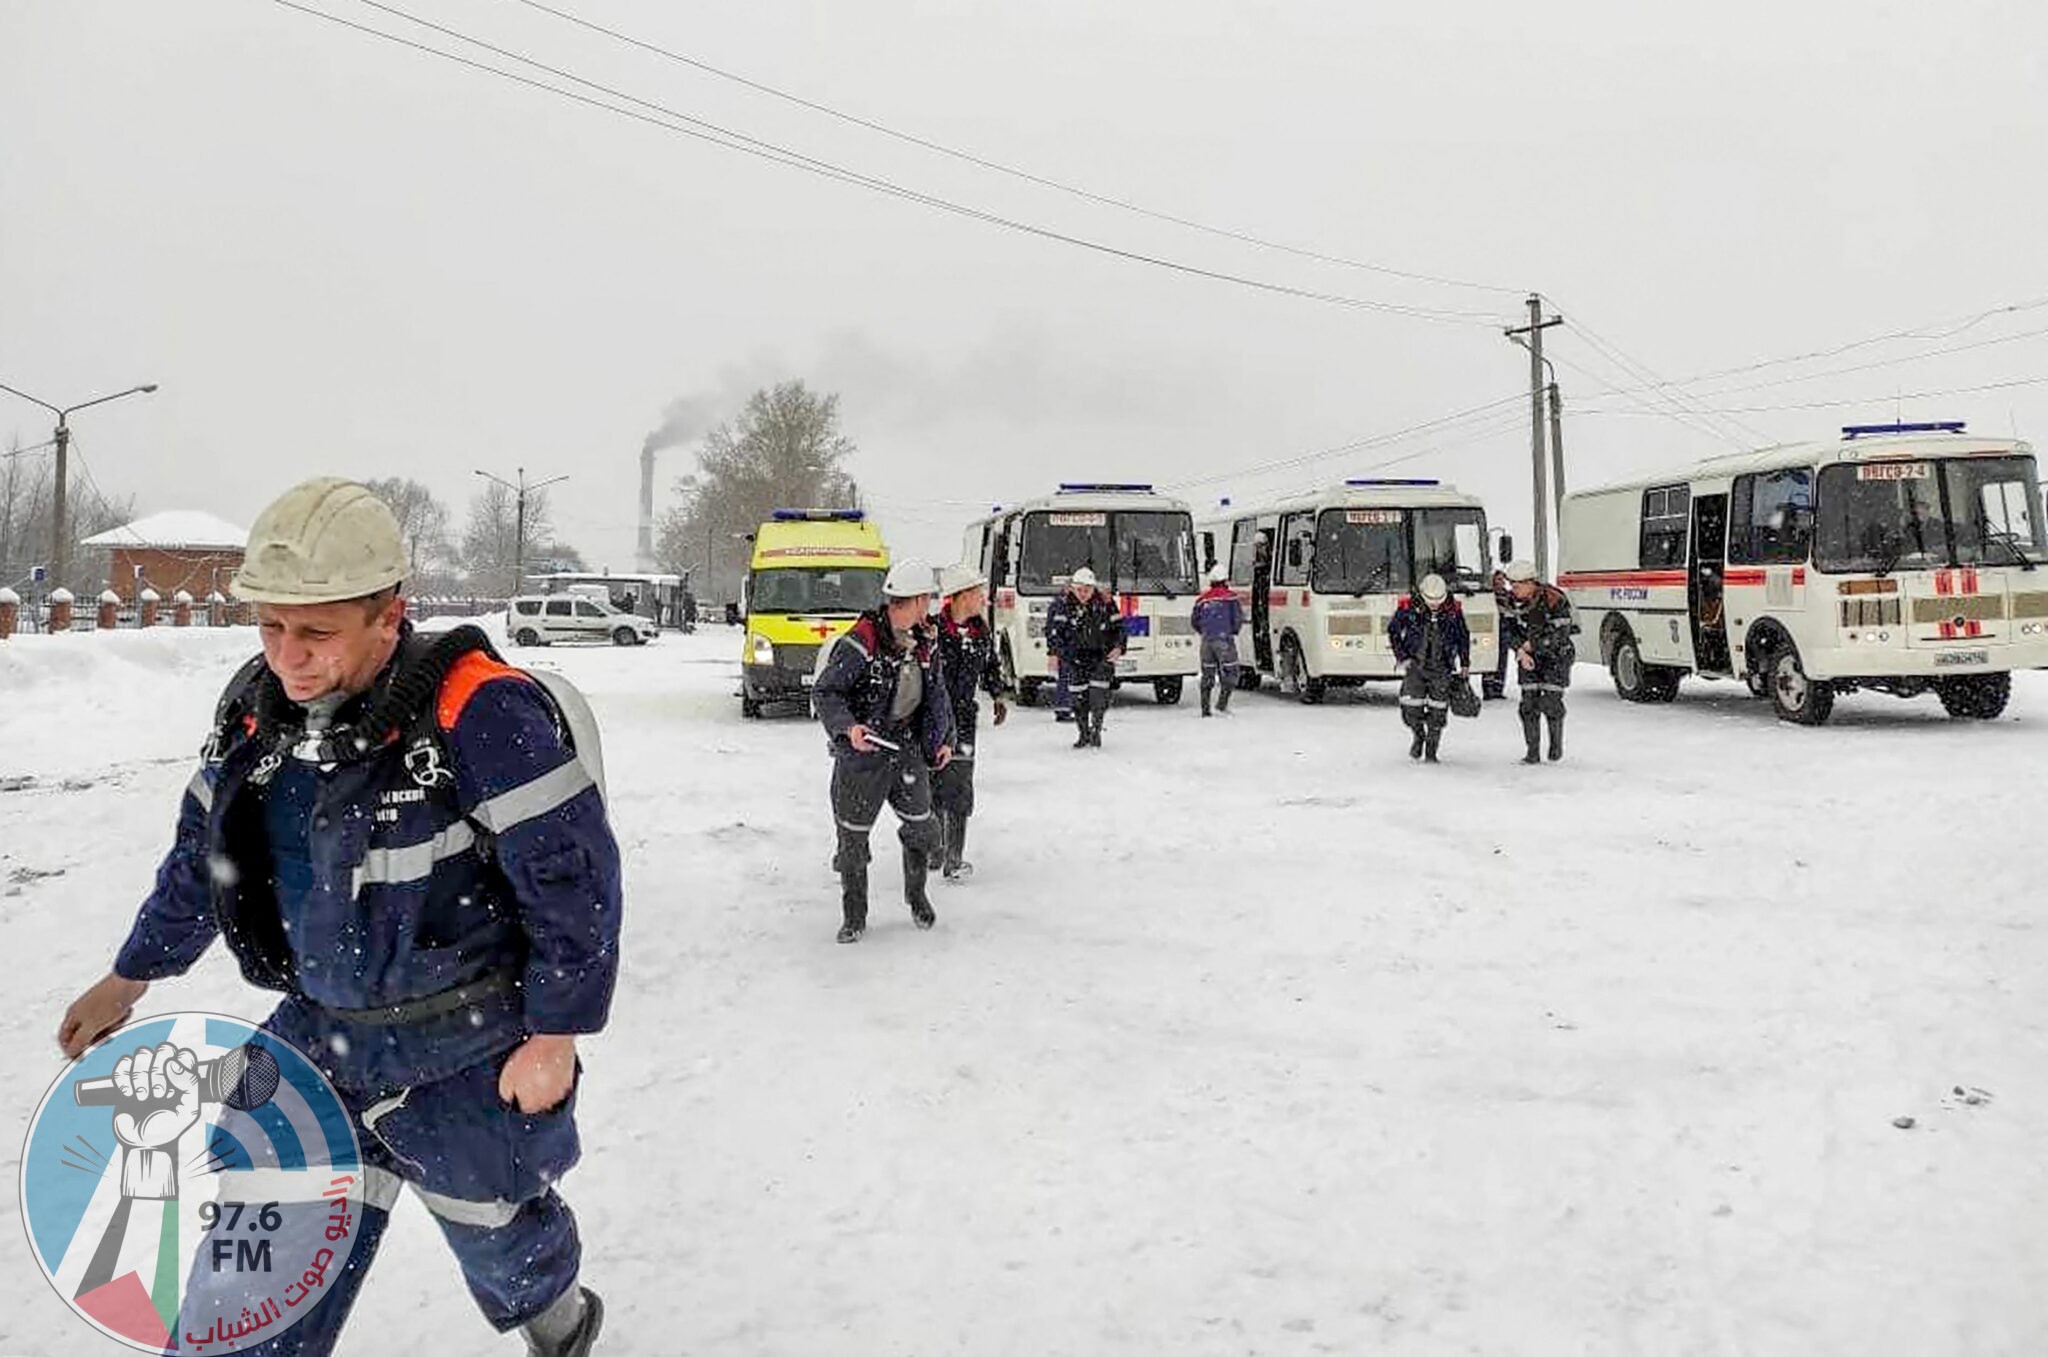 This handout photograph taken and released by the Russian Emergency Situations Ministry on November 25, 2021, shows rescuers arriving at the Listvyazhnaya coal mine near the town of Gramoteino. Russia's emergencies ministry said on November 25 it did not know the whereabouts of 48 people after an accident in a coal mine in Siberia. The Kemerovo region governor said on Telegram that, according to preliminary information, there were 285 people inside the Listvyazhnaya coal mine. - RESTRICTED TO EDITORIAL USE - MANDATORY CREDIT "AFP PHOTO / RUSSIAN EMERGENCY SITUATIONS MINISTRY" - NO MARKETING - NO ADVERTISING CAMPAIGNS - DISTRIBUTED AS A SERVICE TO CLIENTS (Photo by Handout / RUSSIAN EMERGENCY SITUATIONS MINISTRY / AFP) / RESTRICTED TO EDITORIAL USE - MANDATORY CREDIT "AFP PHOTO / RUSSIAN EMERGENCY SITUATIONS MINISTRY" - NO MARKETING - NO ADVERTISING CAMPAIGNS - DISTRIBUTED AS A SERVICE TO CLIENTS